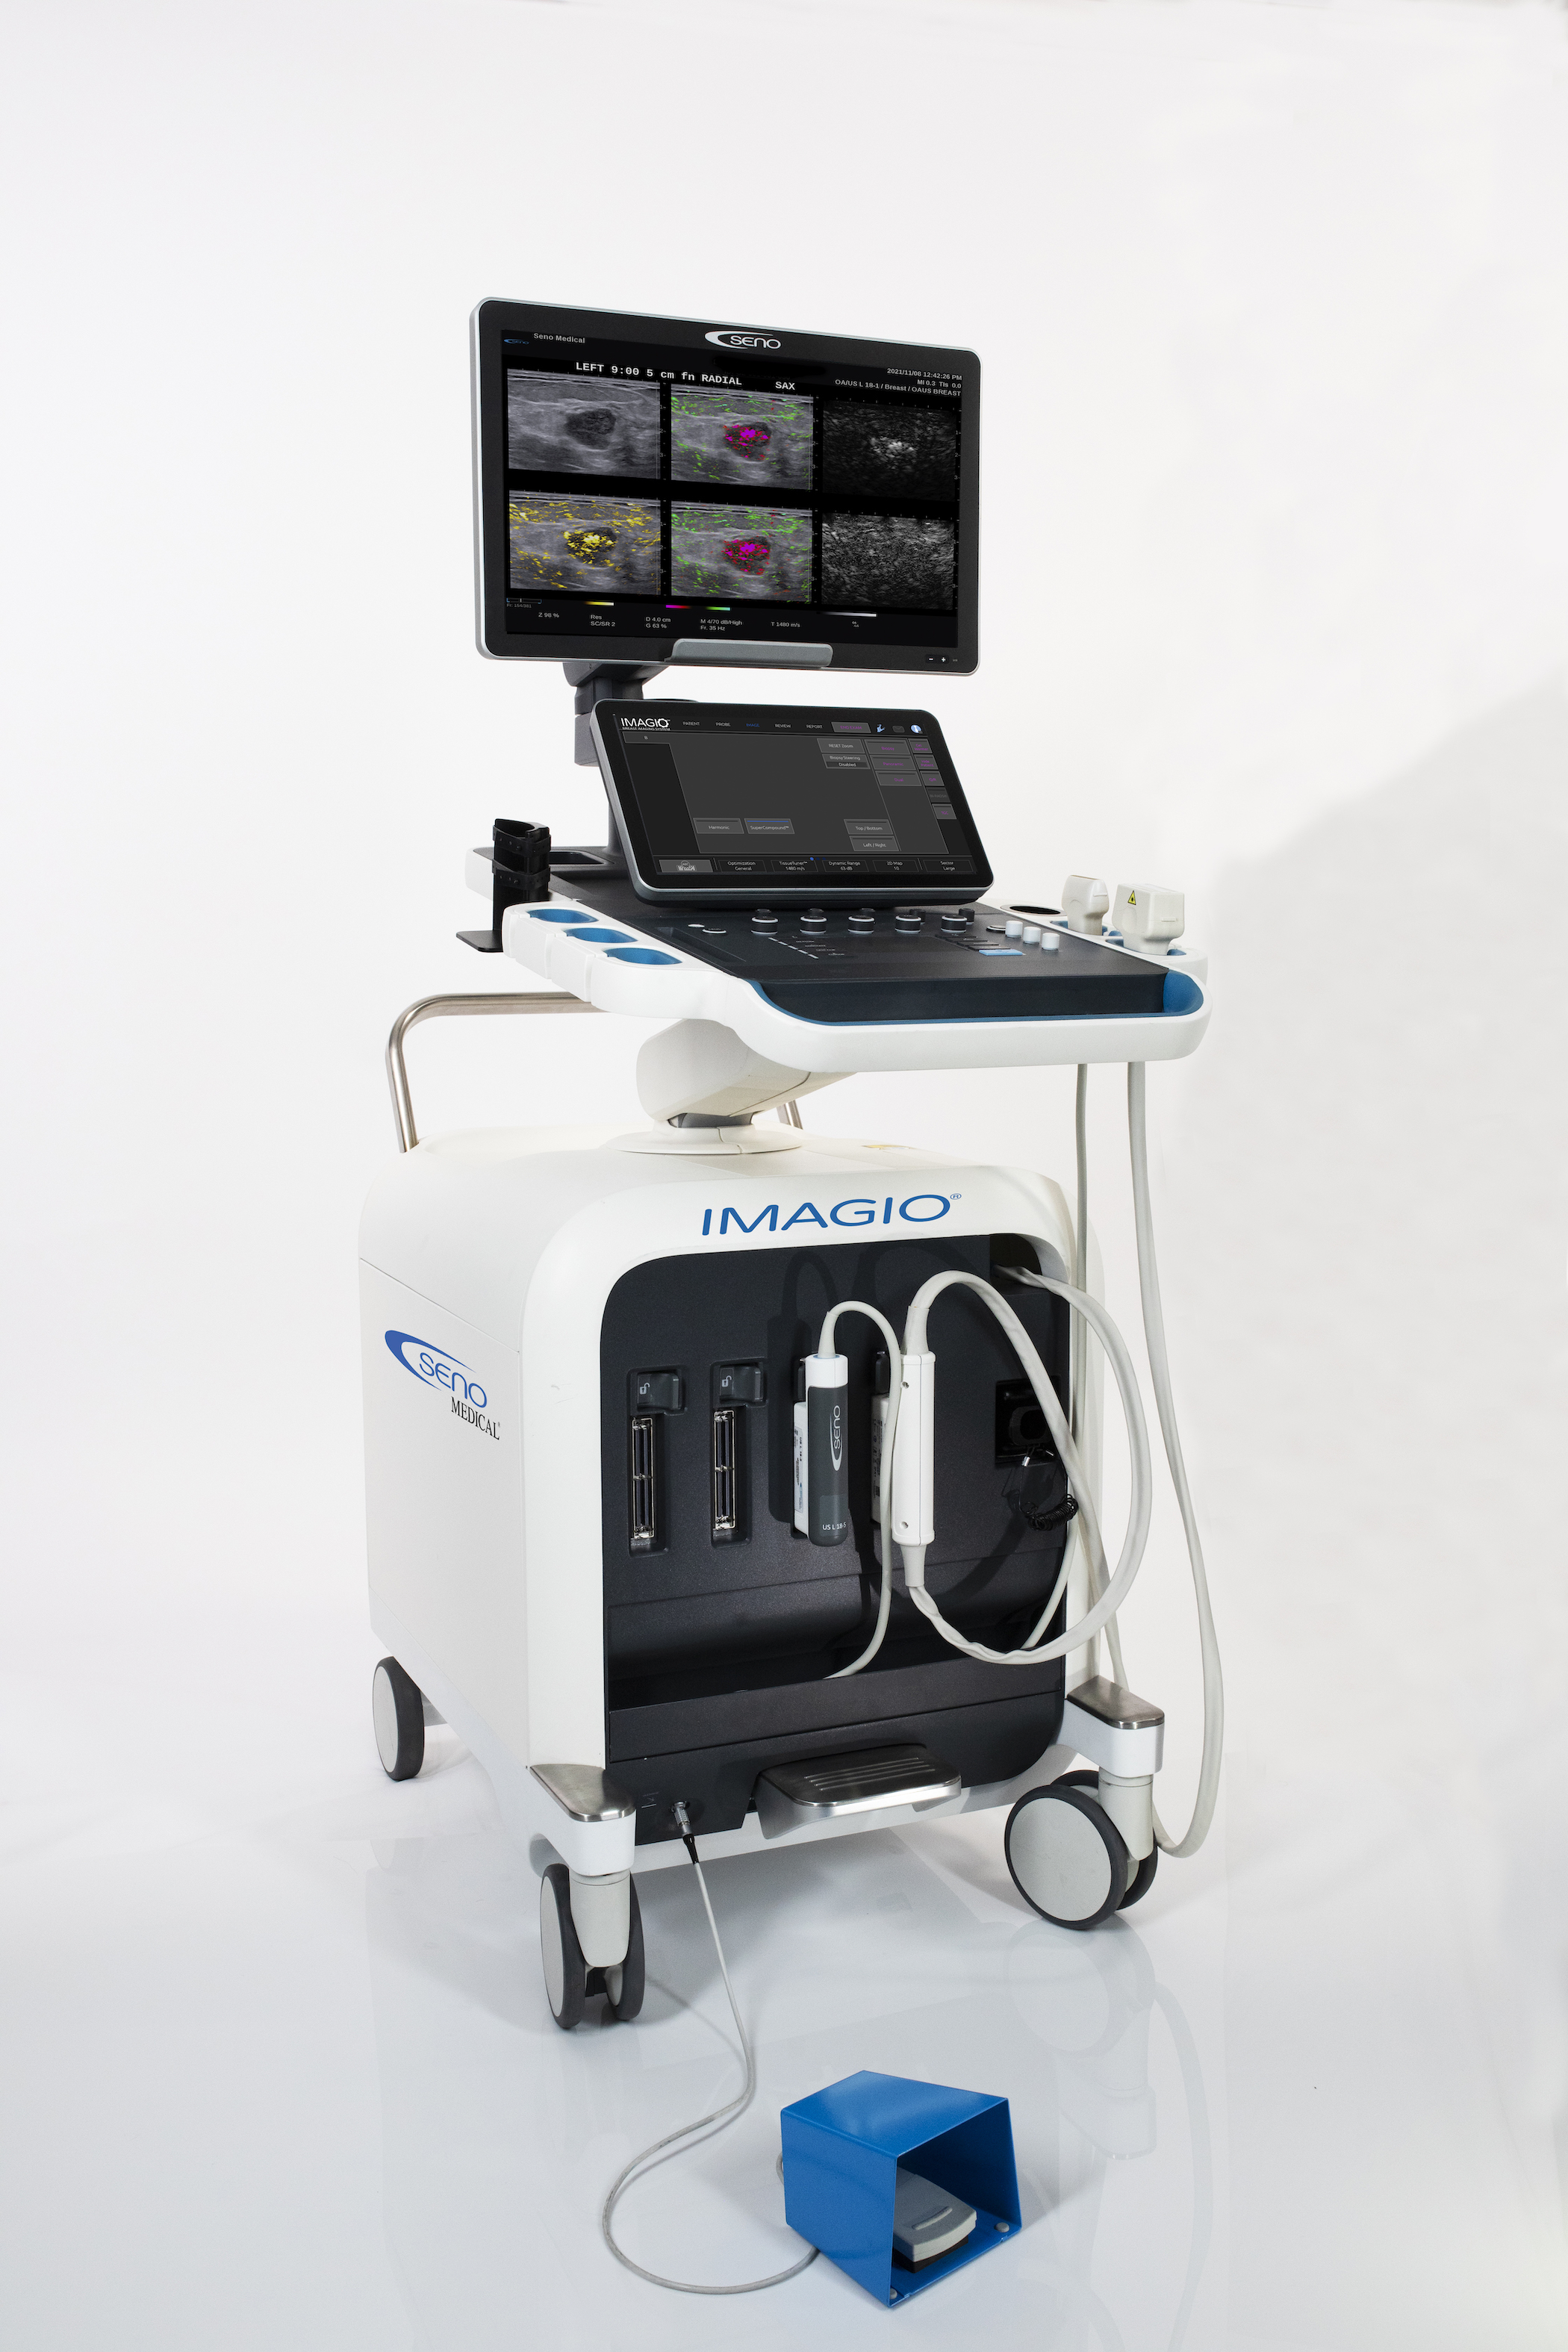 Retrospective Study of Seno Medical’s Imagio® Breast Imaging System Published in American Journal of Roentgenology Shows System May Help Reduce Biopsies of Benign Breast Masses Compared to Ultrasound Alone